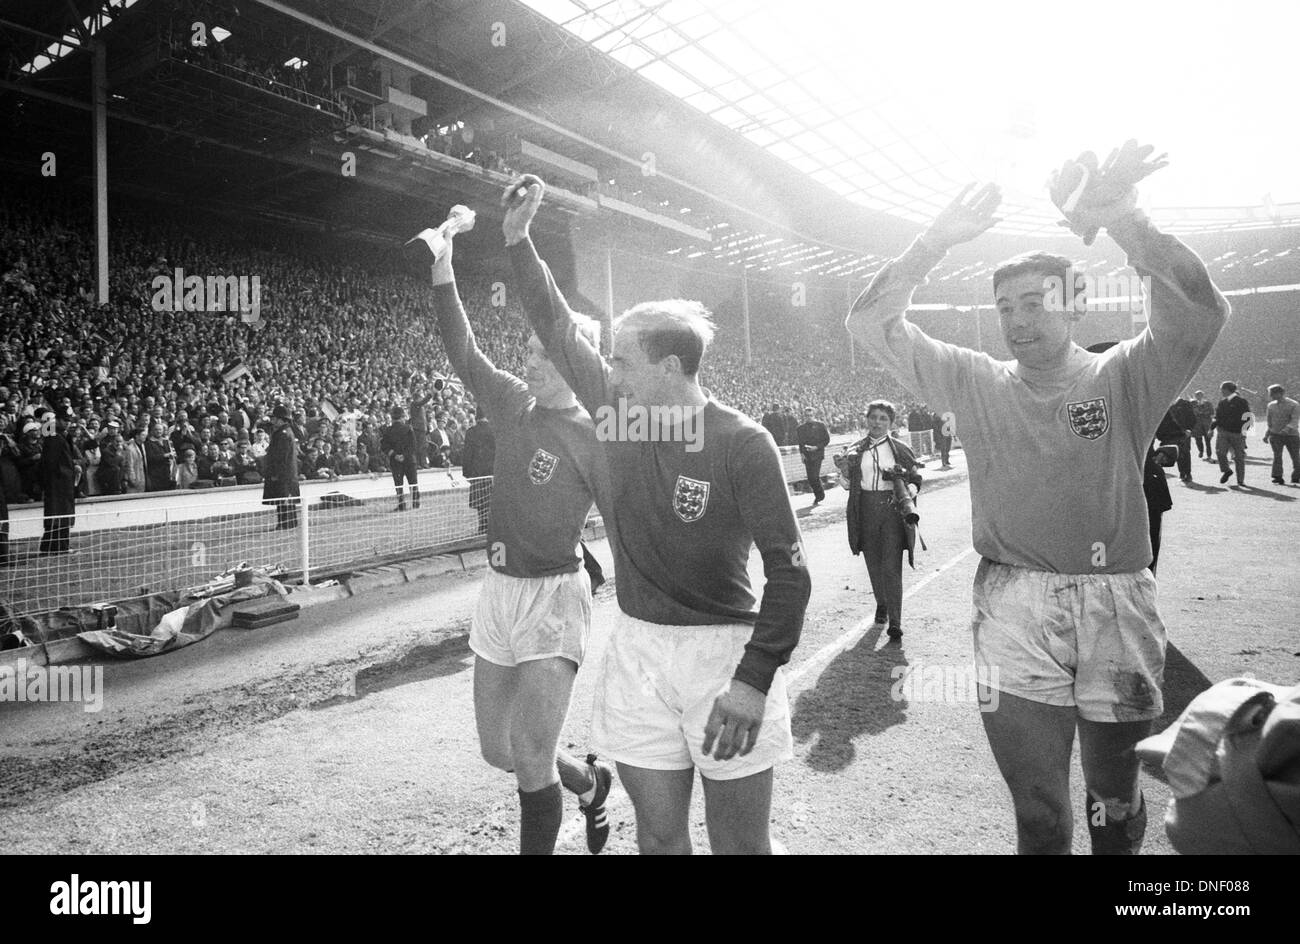 30.07.1966 Wembley Stadium, London England. A jubilant England team celebrate their win at the 1966 World Cup final, where they beat Germany 4-2. Bobby Moore holds the Jules Rimet trophy with George Cohen and goalkeeper Gordon Banks Stock Photo